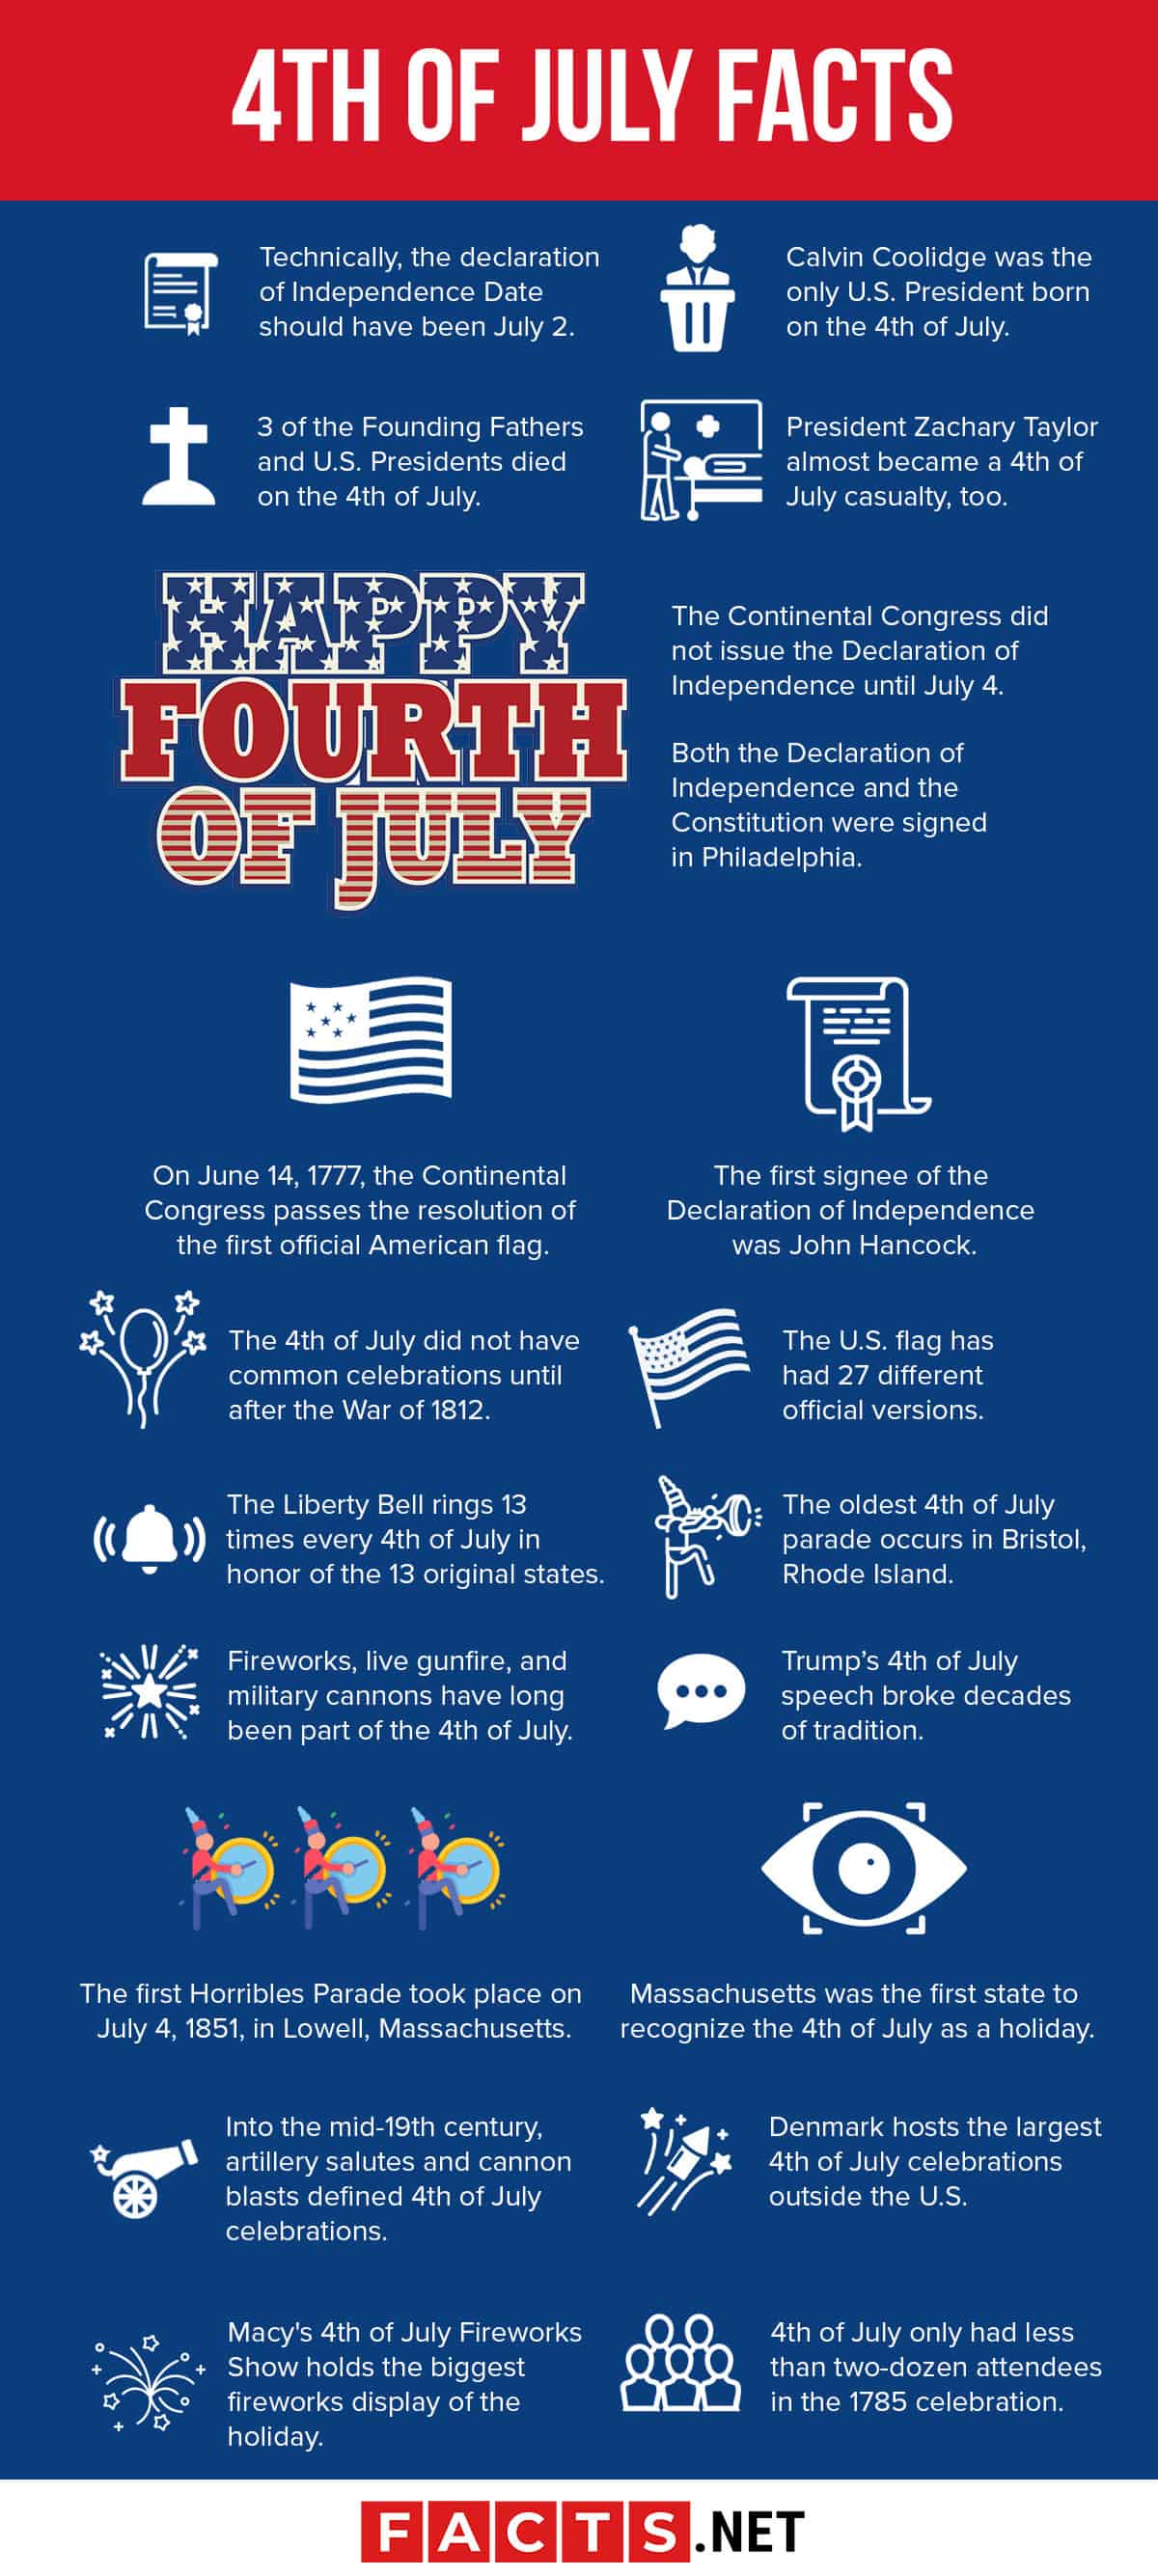 47 Facts About 4th Of July You Must Know While Celebrating - Facts.net